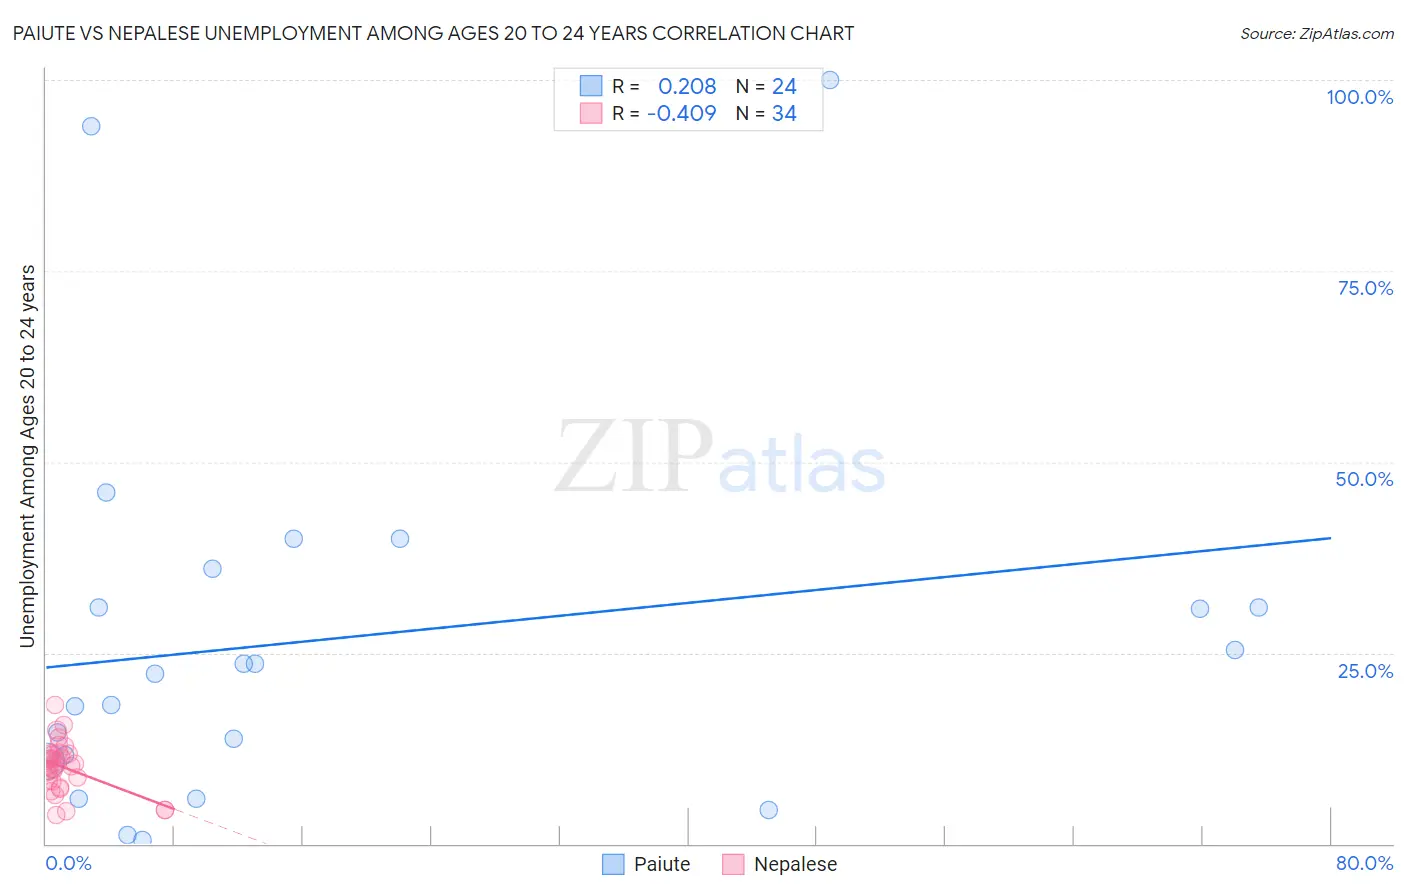 Paiute vs Nepalese Unemployment Among Ages 20 to 24 years